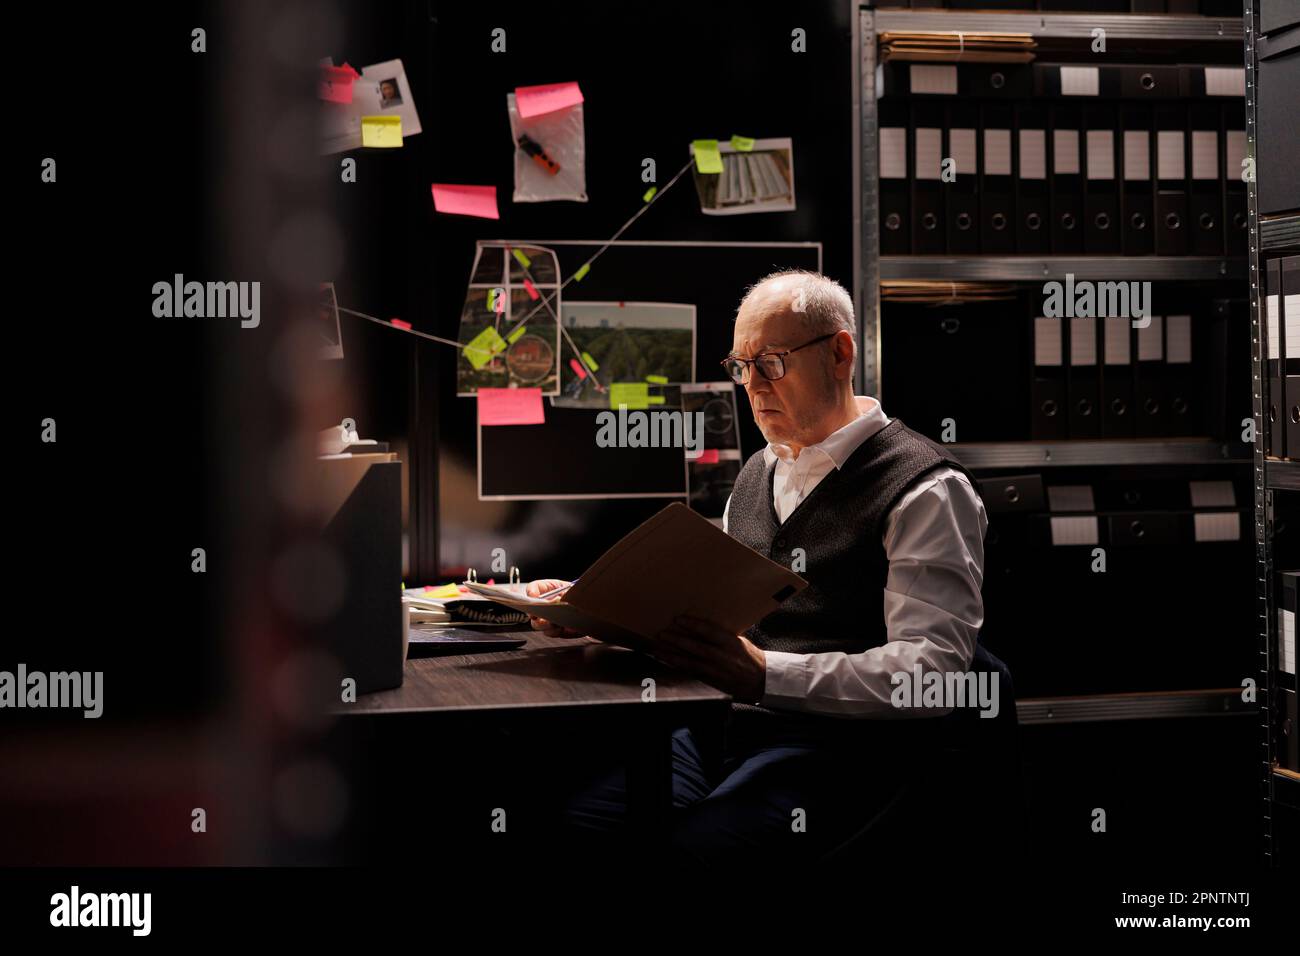 Senior police officer looking at criminal investigations files, working overhours at mysterious suspect profile in arhive room. Elderly private detective analyzing crime scene evidence Stock Photo